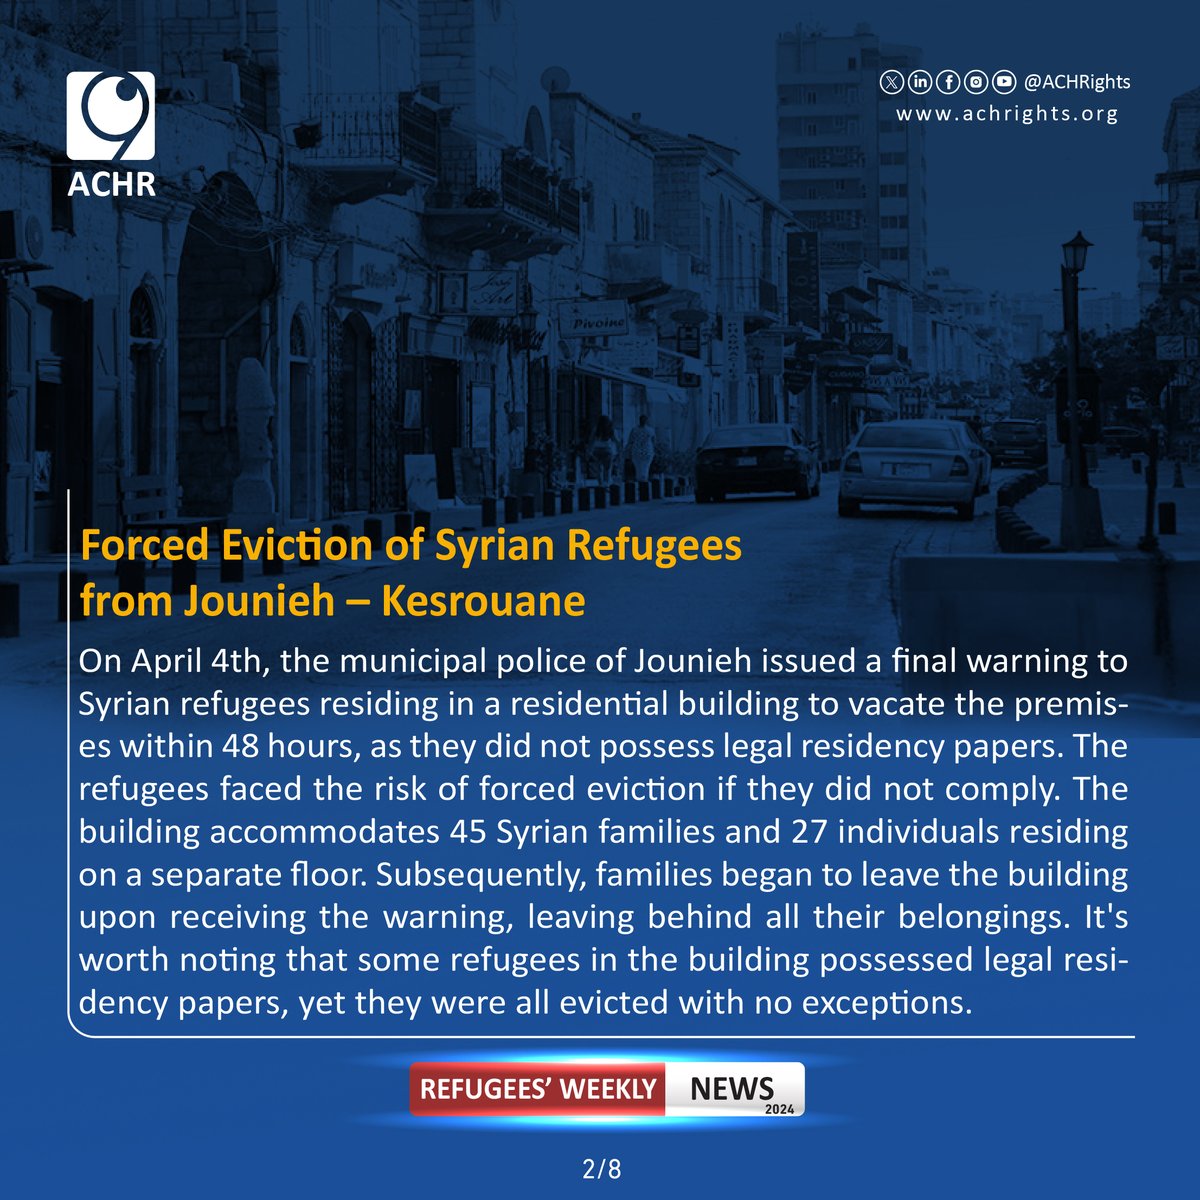 Forced Eviction of Syrian Refugees from Jounieh – Kesrouane.
#Together_for_Human_Rights #weeklynews #violations #humanrights #syrianrefugees #lebanon #syria #RefugeesRight